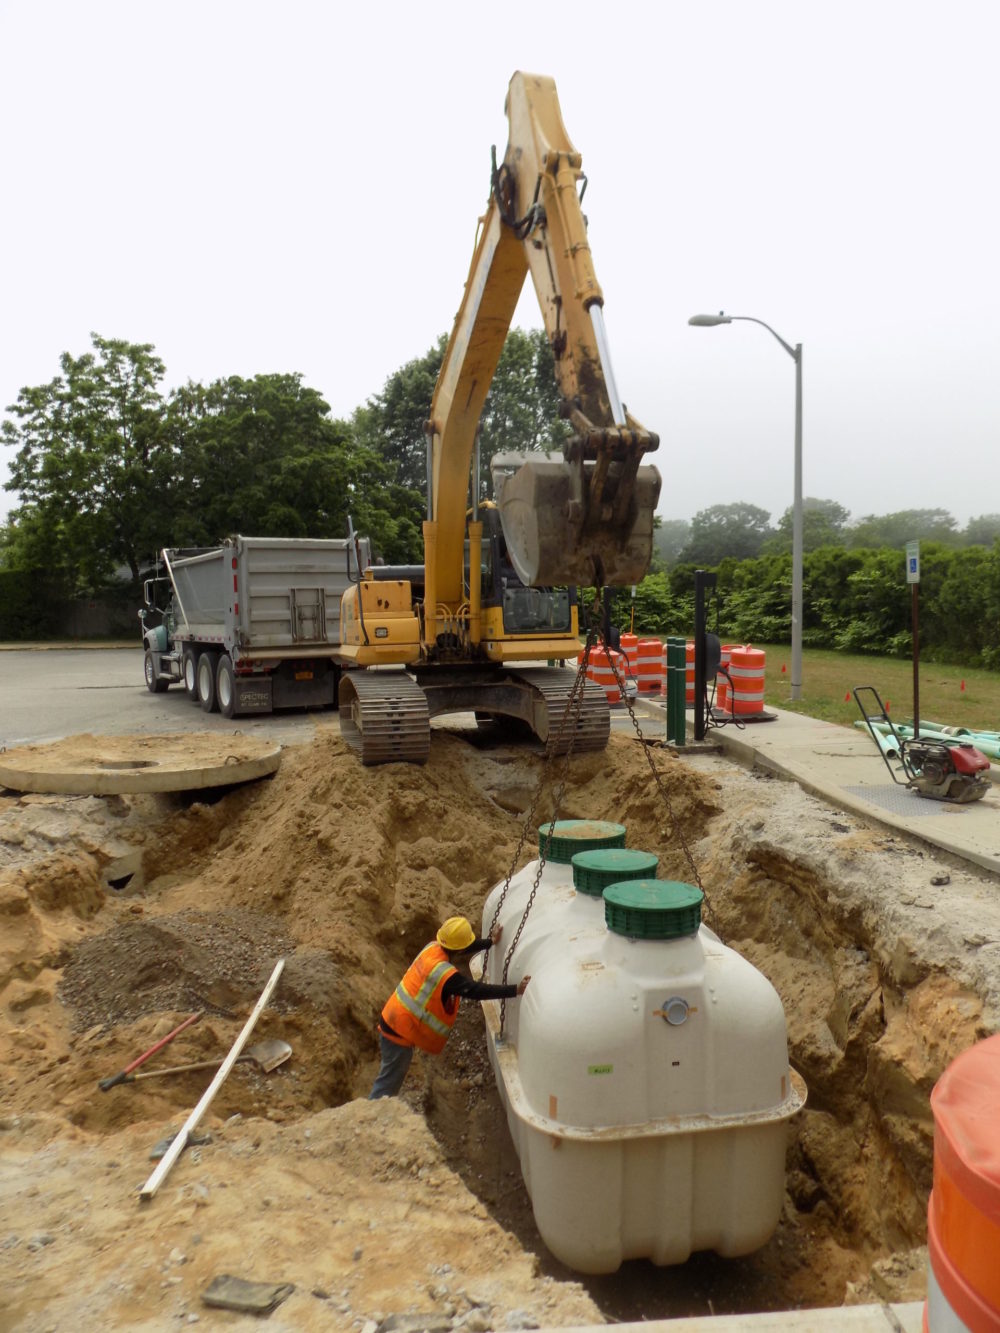 Some of the new I/A septic systems, like this one being installed in Amagansett, are proving to outperform the minimum standards of nitrogen reduction set by the county. But other systems have not met the expectations and their manufacturers are being forced to make retrofits to installed units to improve their performance.